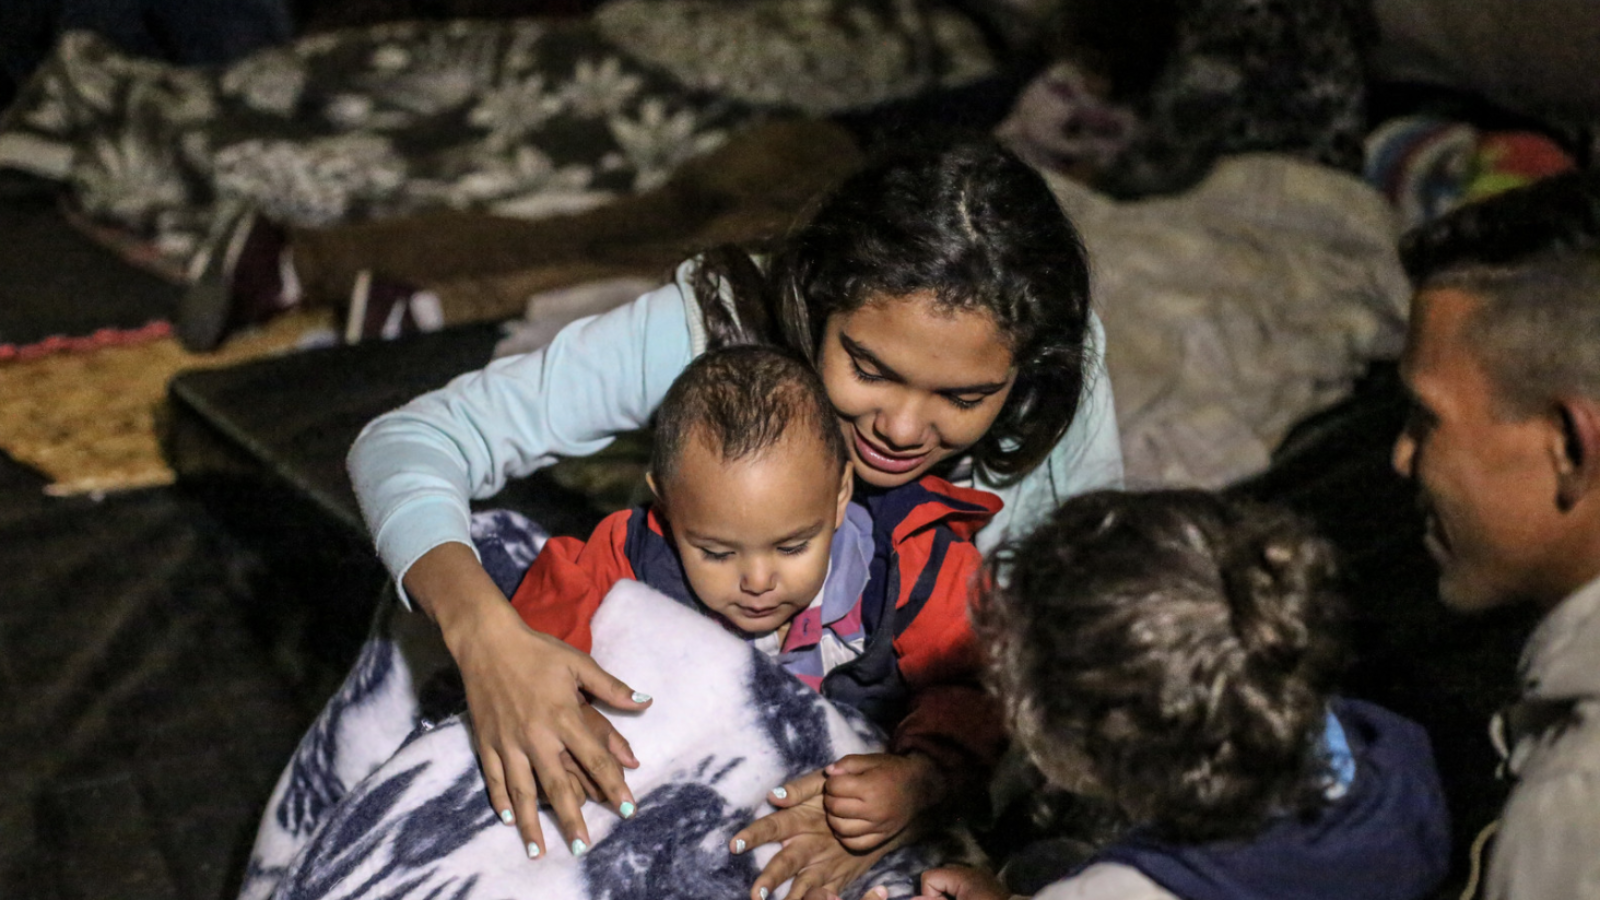 A Venezuelan mother and two of her children sit playing in a temporary shelter tent for migrants.